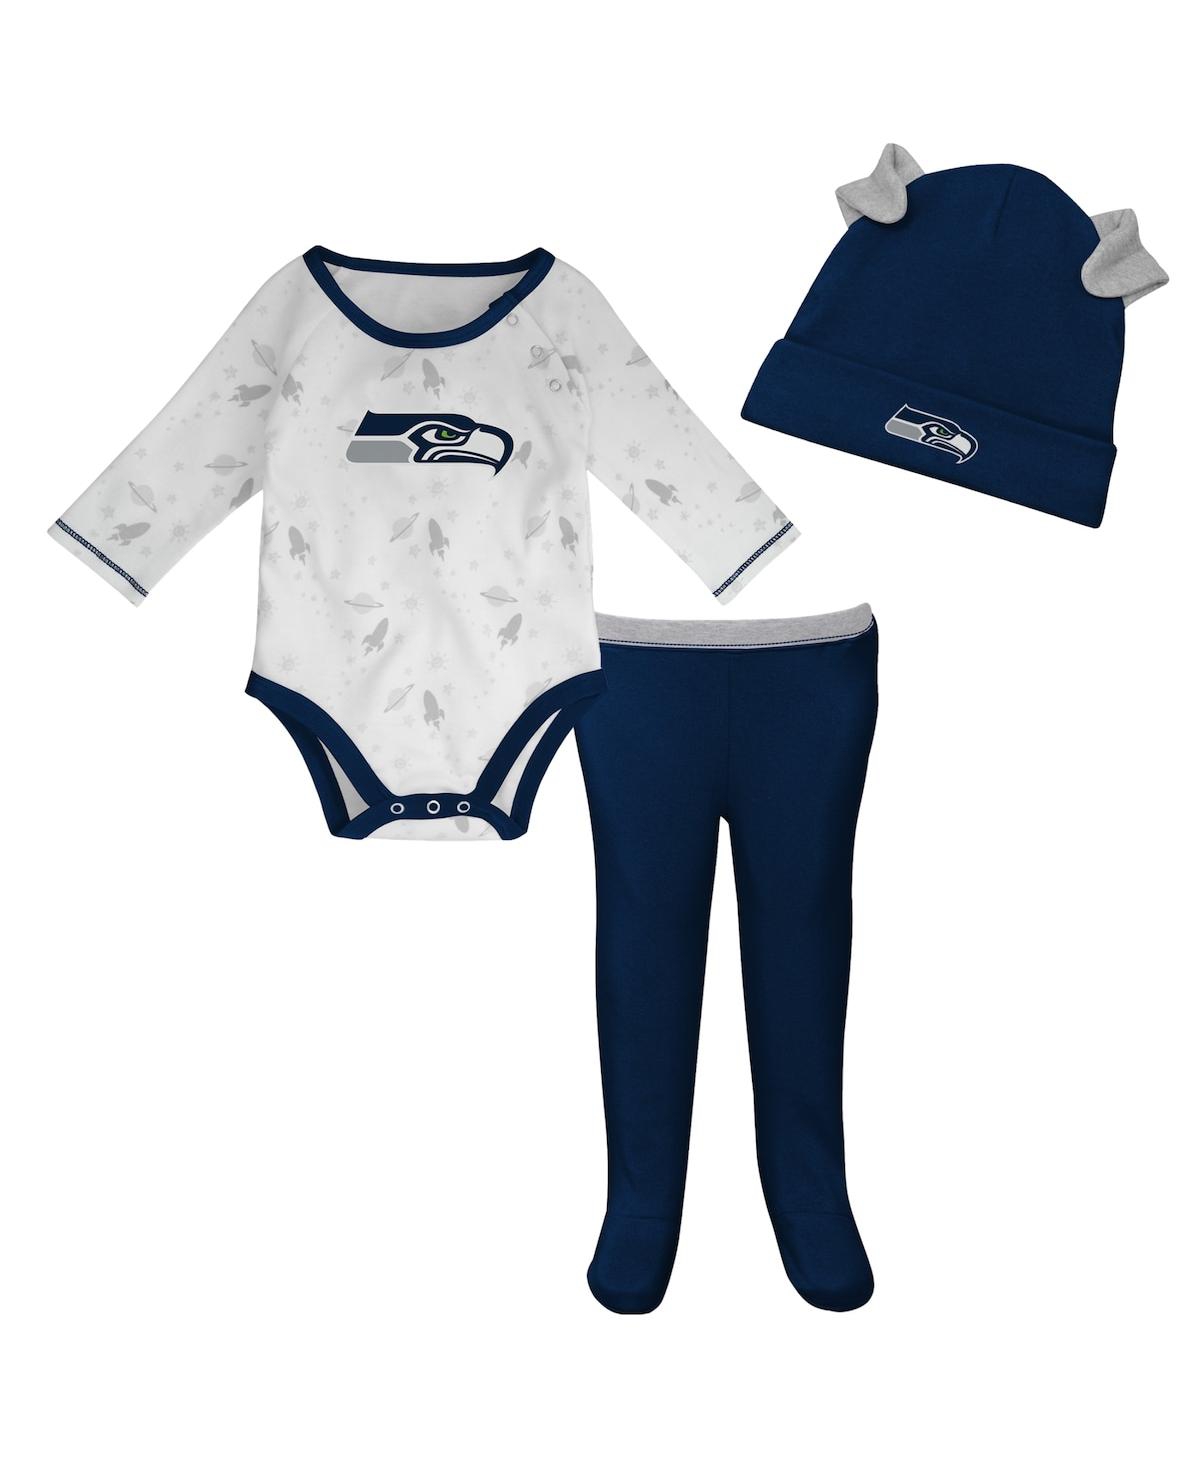 Shop Outerstuff Newborn And Infant Boys And Girls White, Seattle Seahawks Dream Team Bodysuit Pants And Hat Set